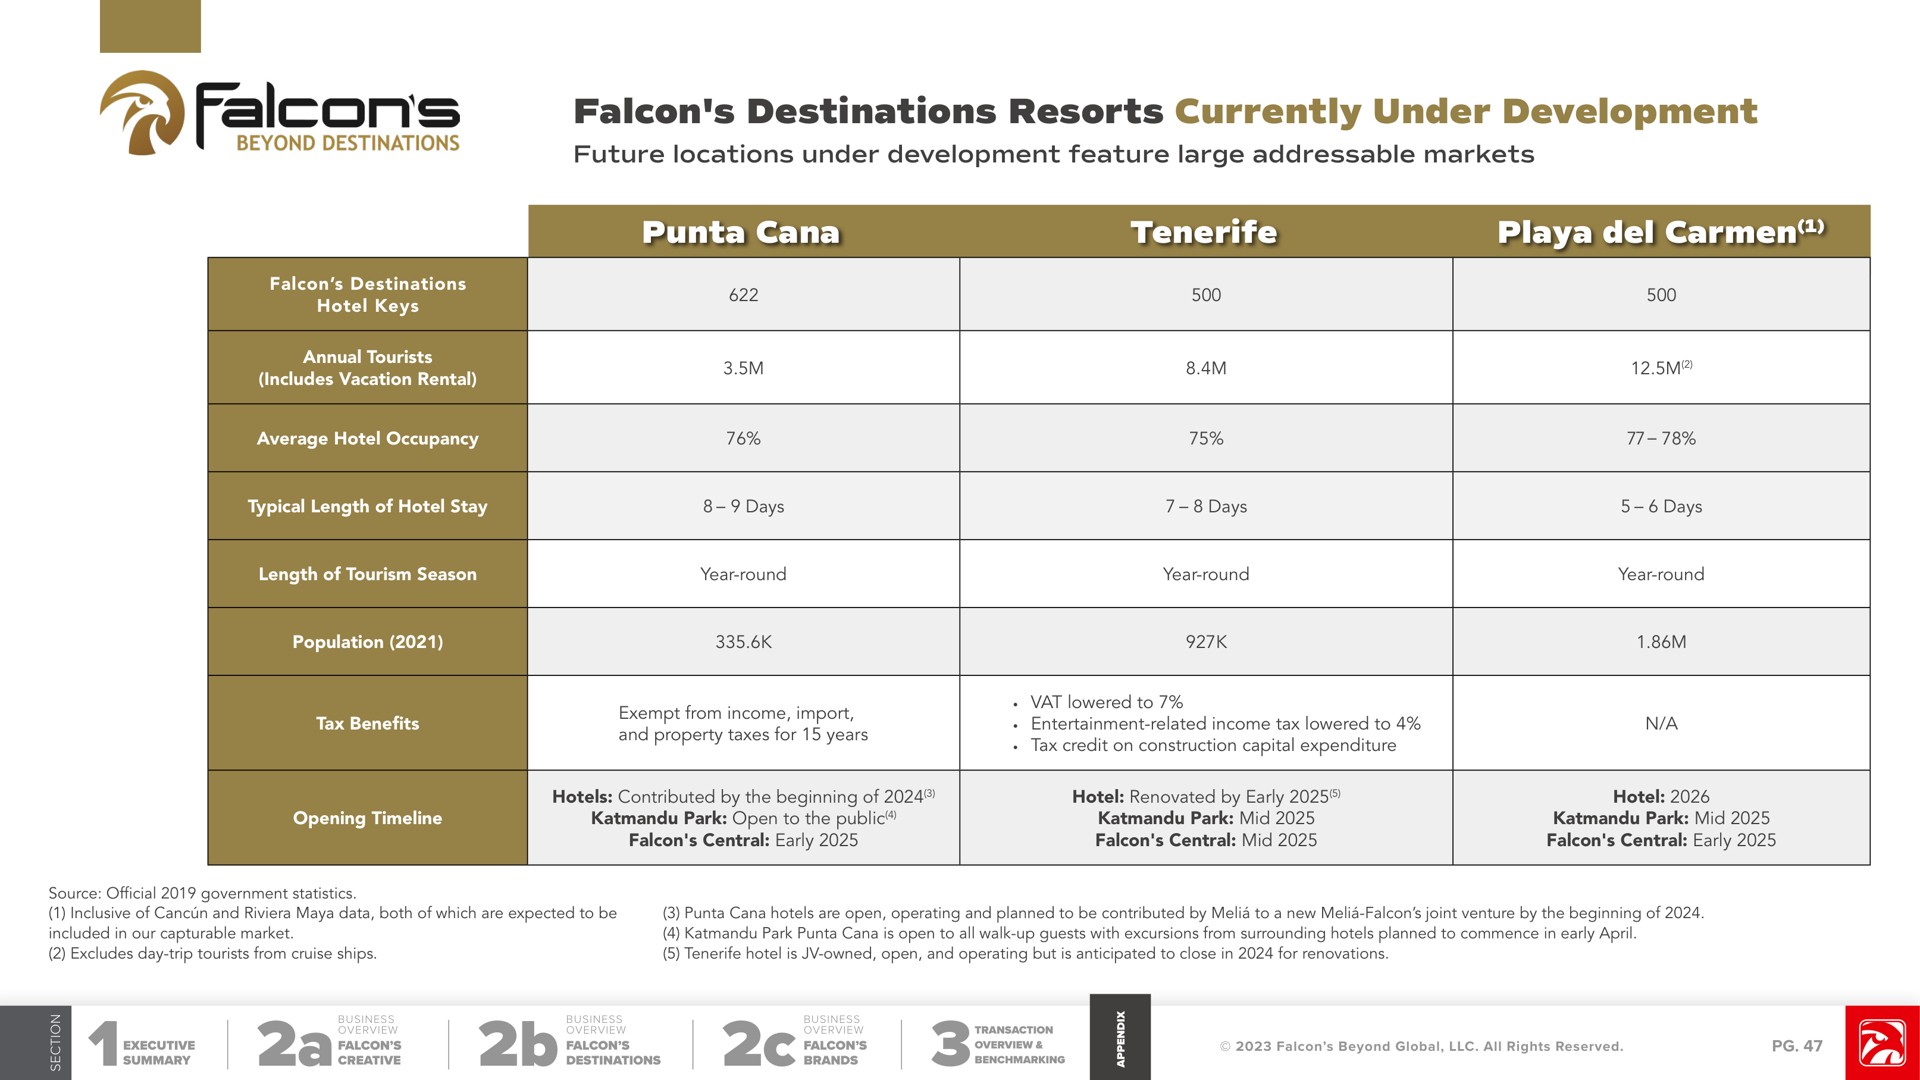 falcon destinations resorts currently under development future locations under development feature large markets punta playa falcons aril be | Falcon's Beyond